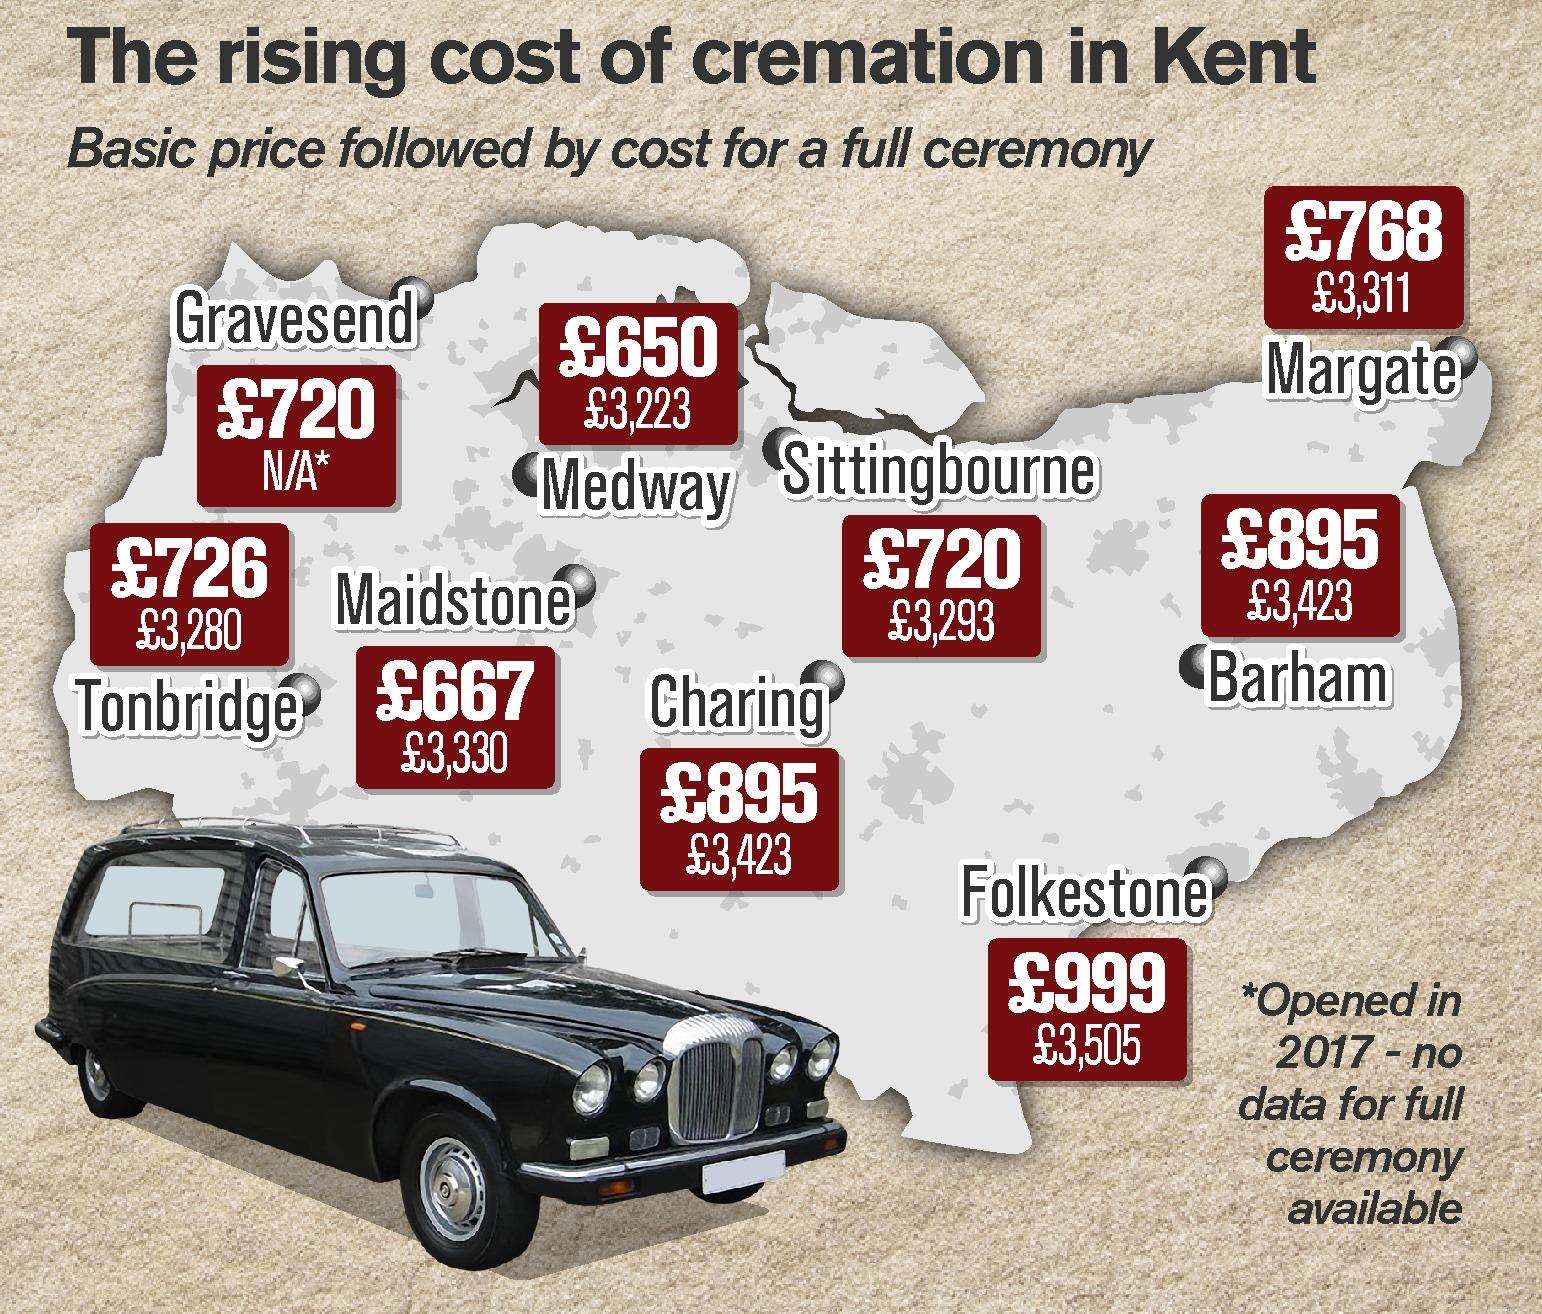 The price of cremations across Kent